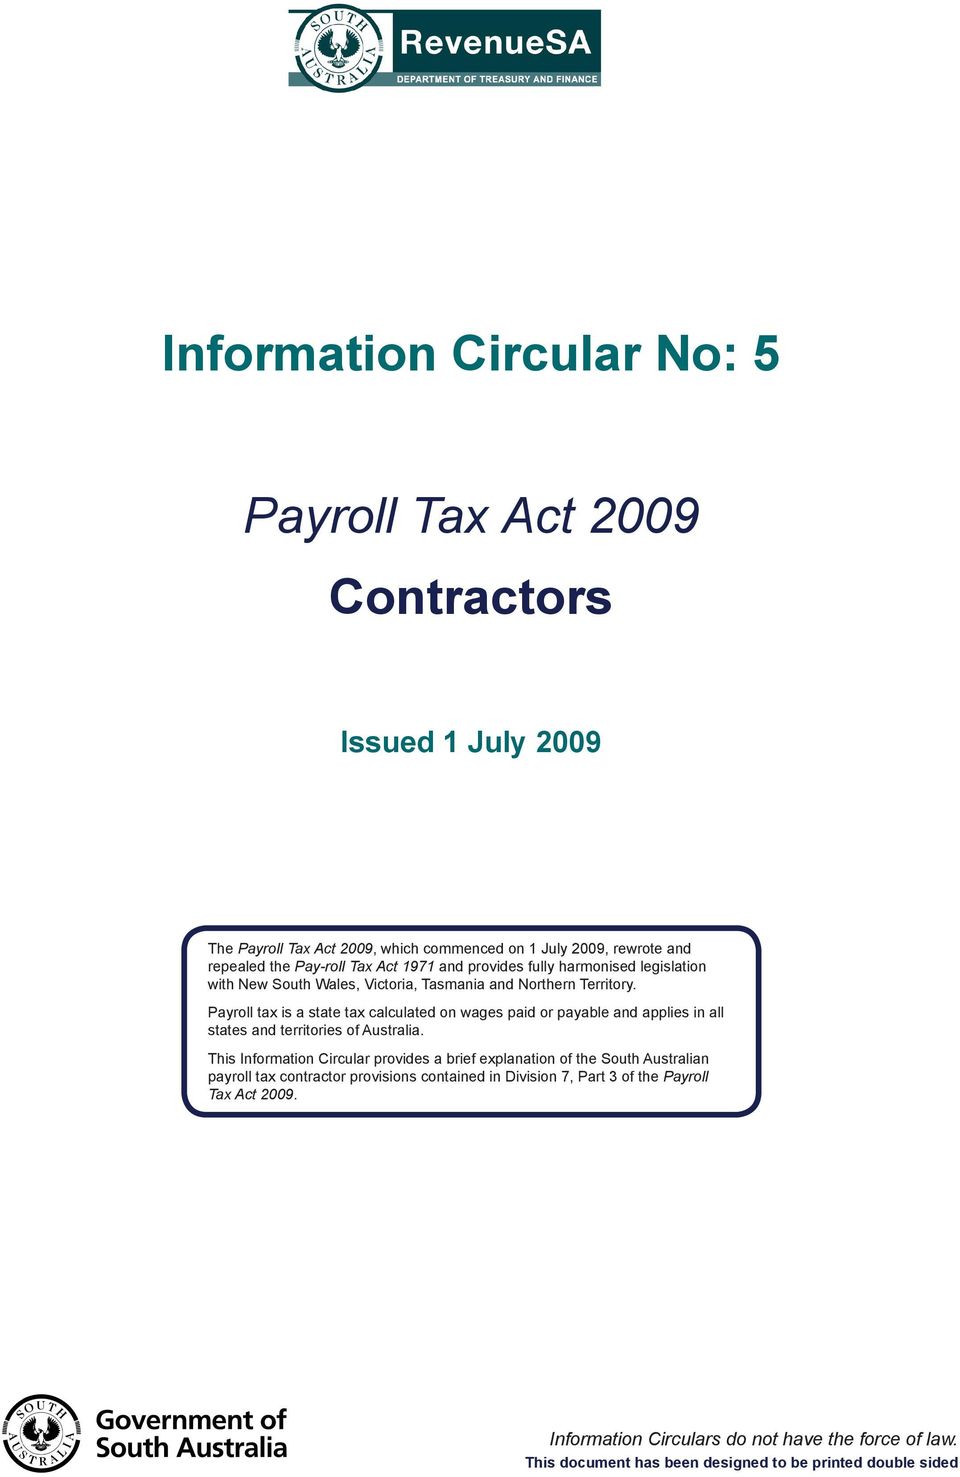 Payroll tax is a state tax calculated on wages paid or payable and applies in all states and territories of Australia.